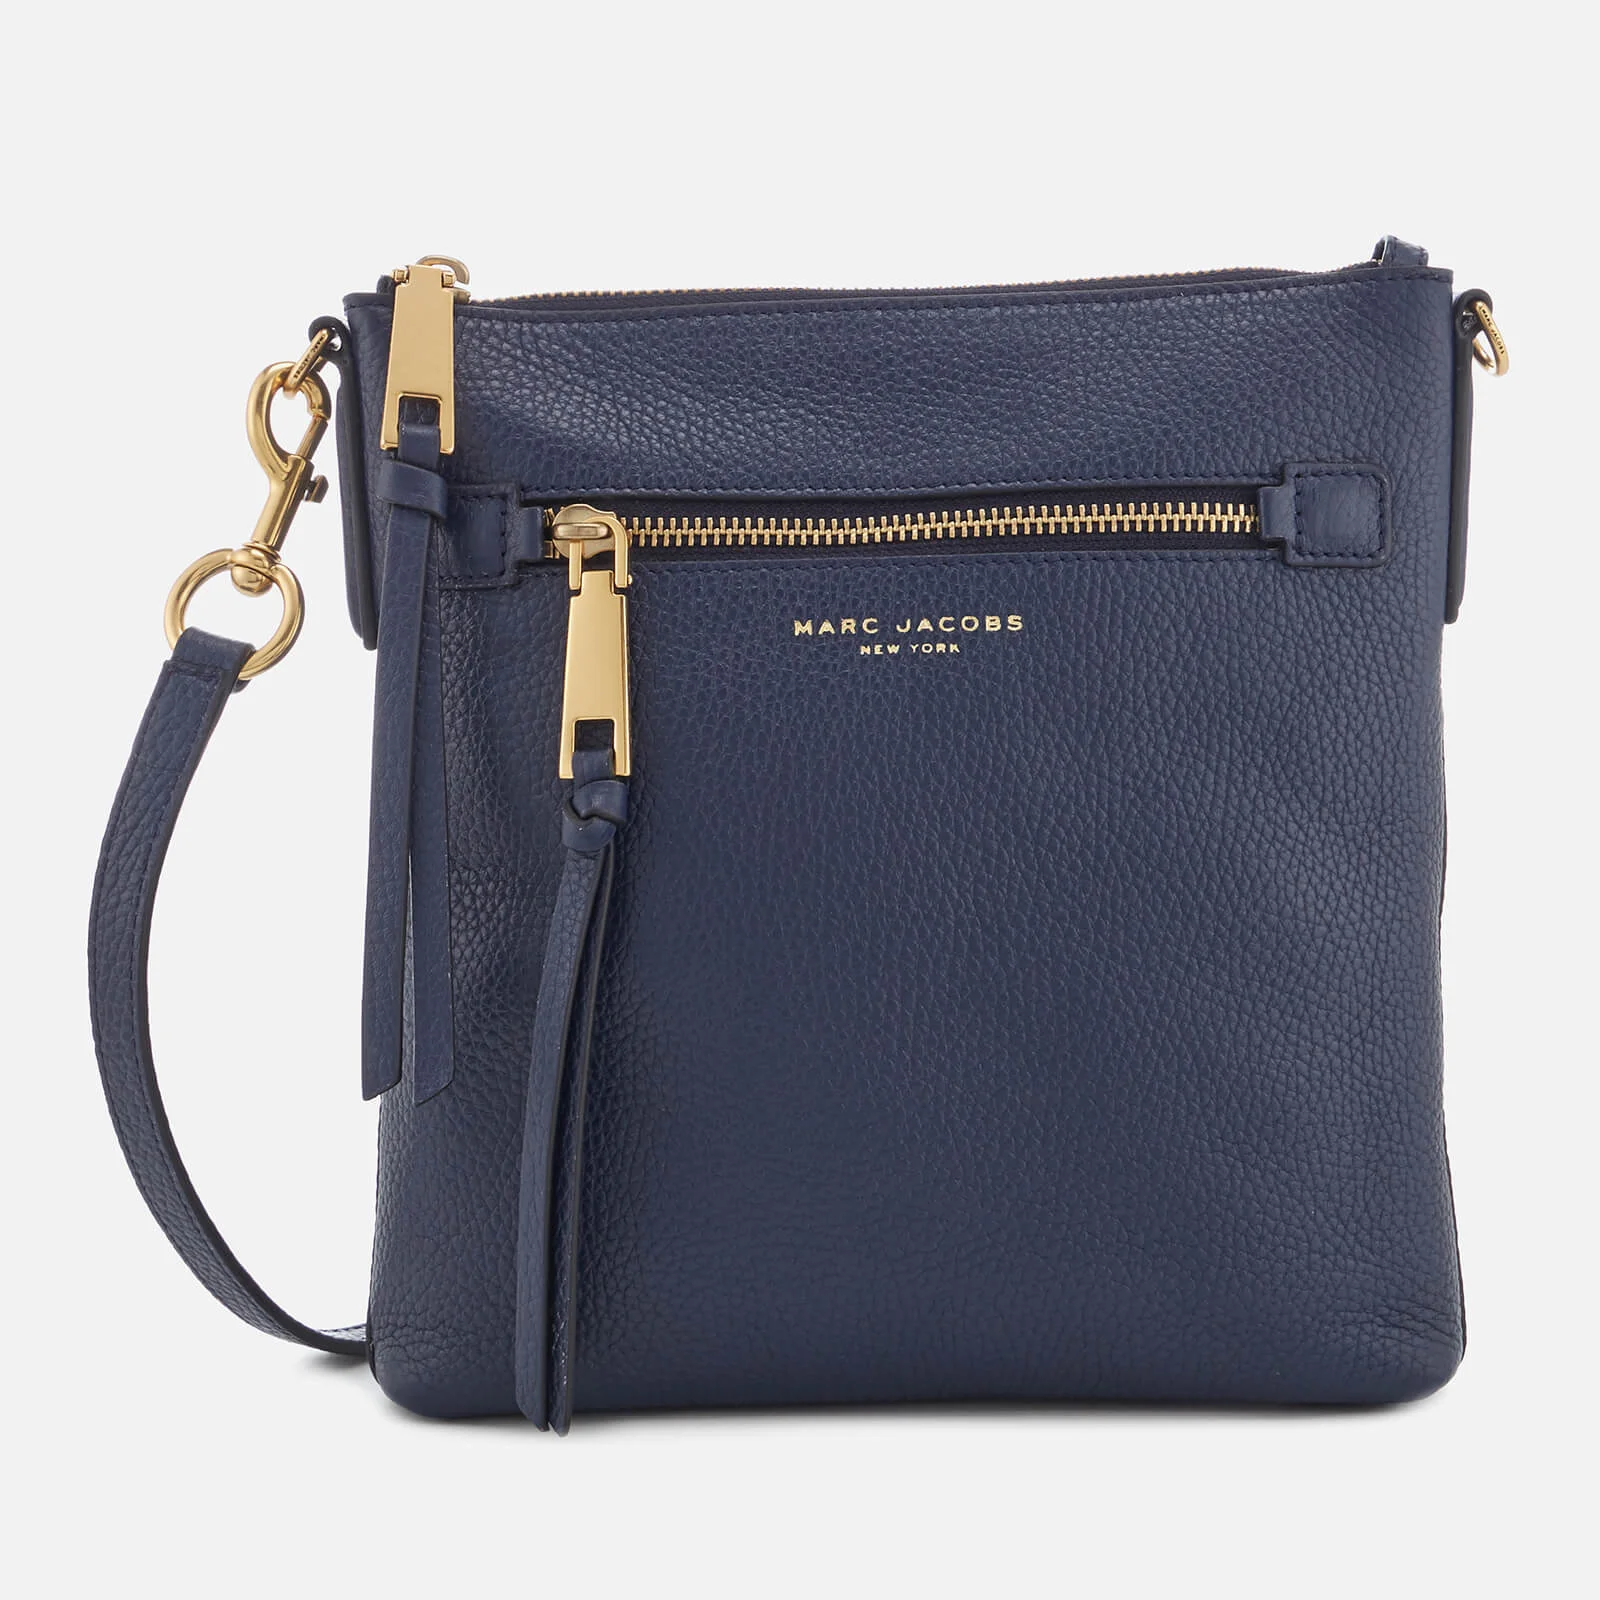 Marc Jacobs Women's North South Cross Body Bag - Midnight Blue Image 1